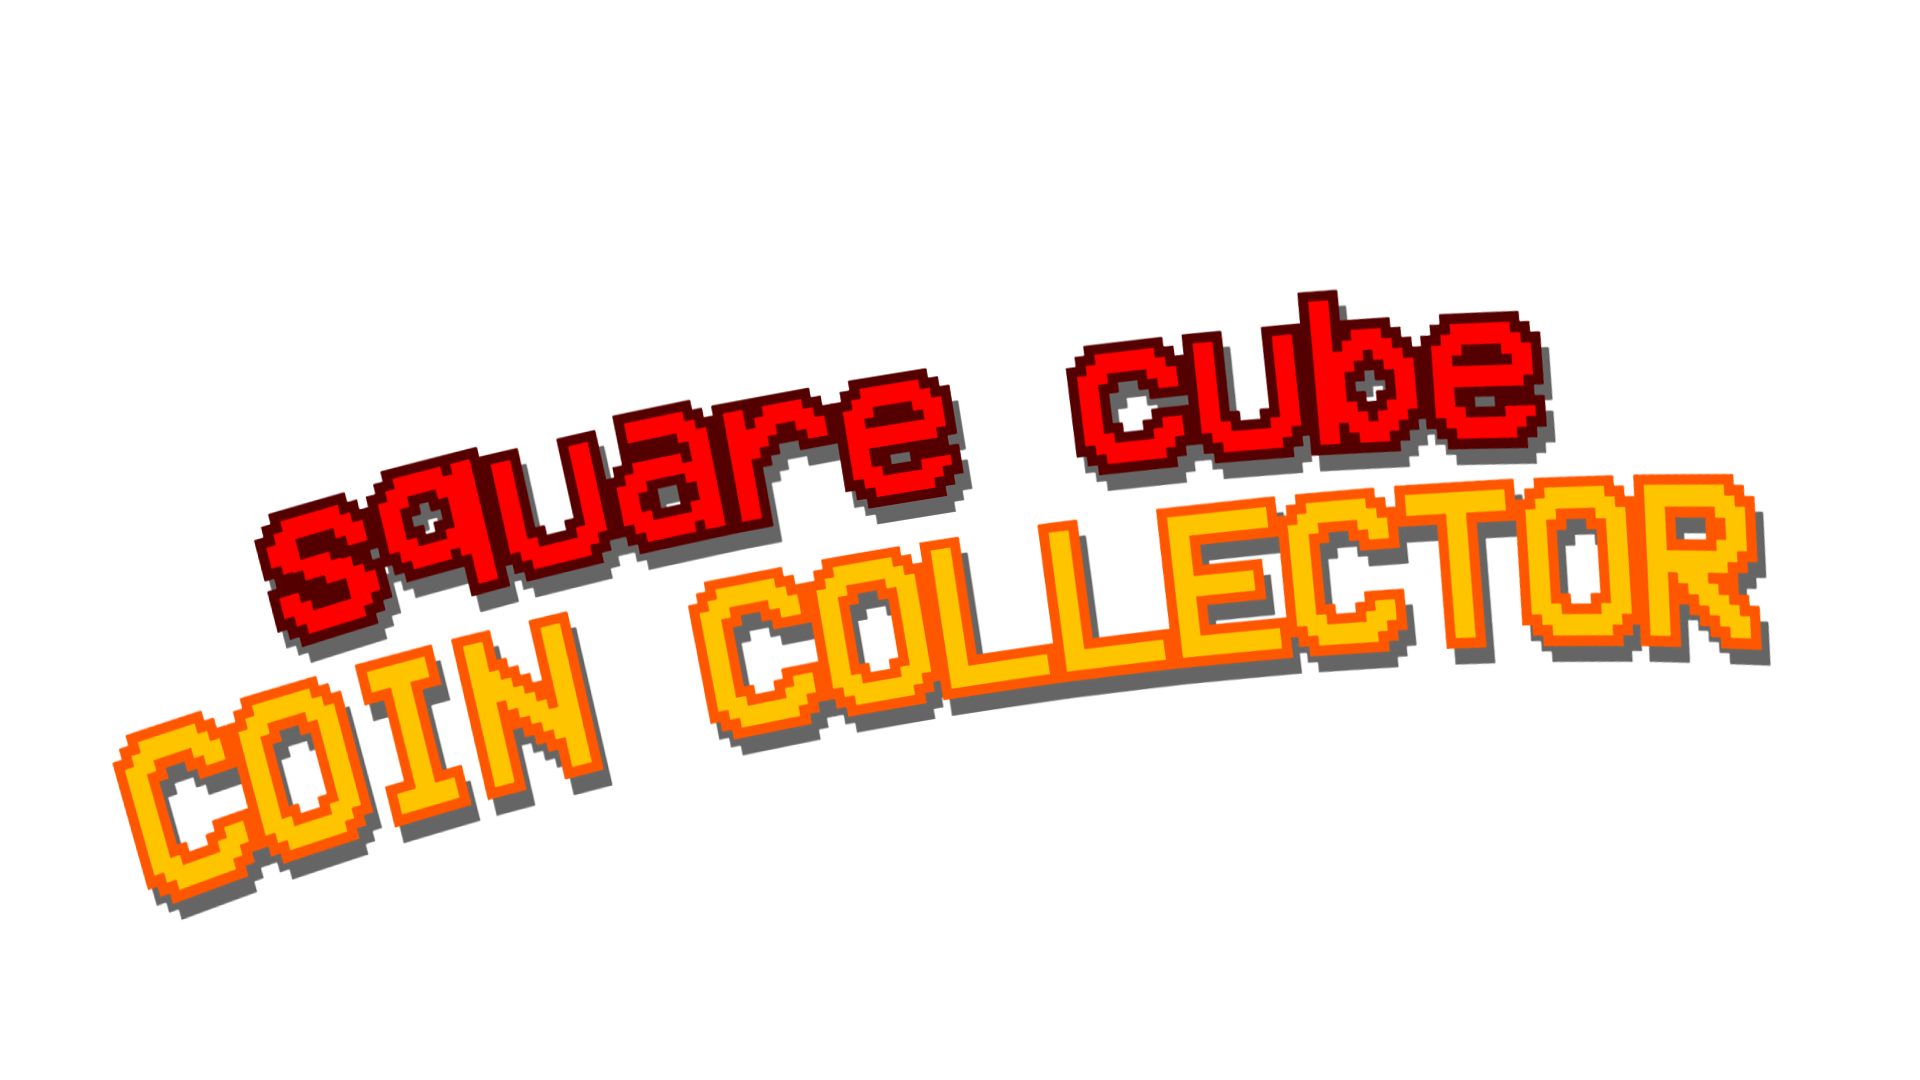 square cube coin collector